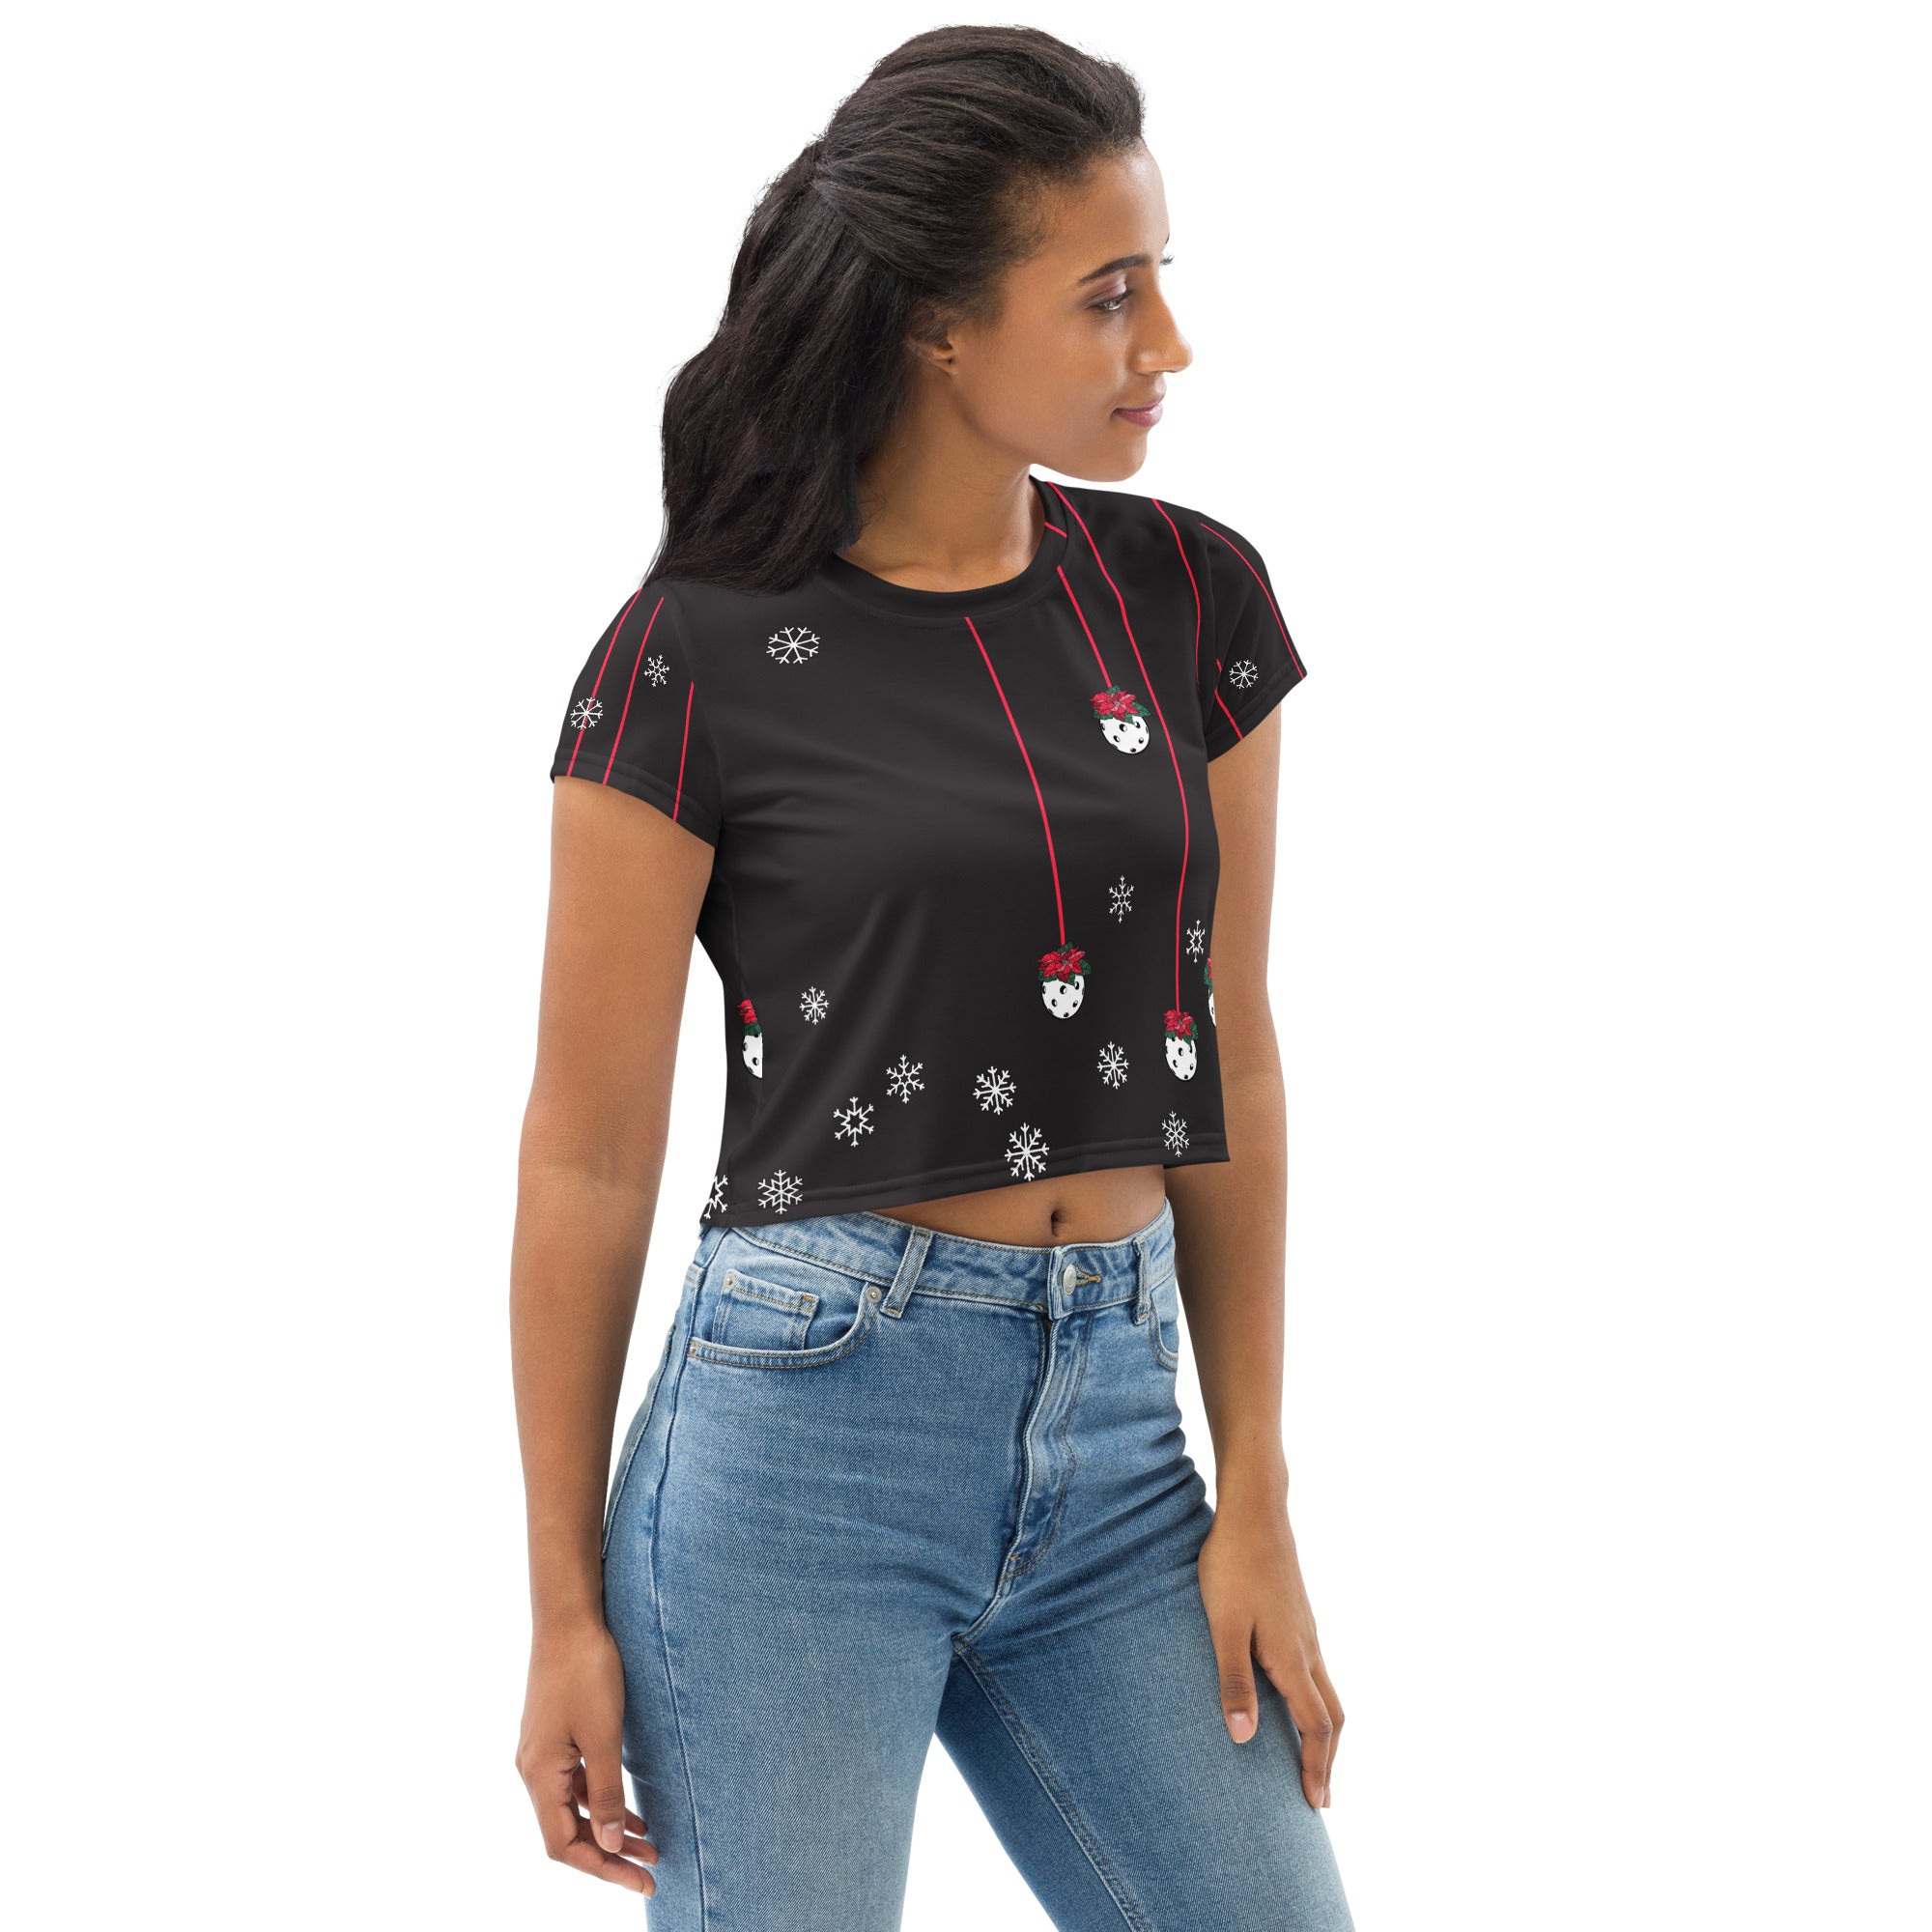 Poinsettia Pickleball© Crop Tee for Women Pickleball Enthusiasts